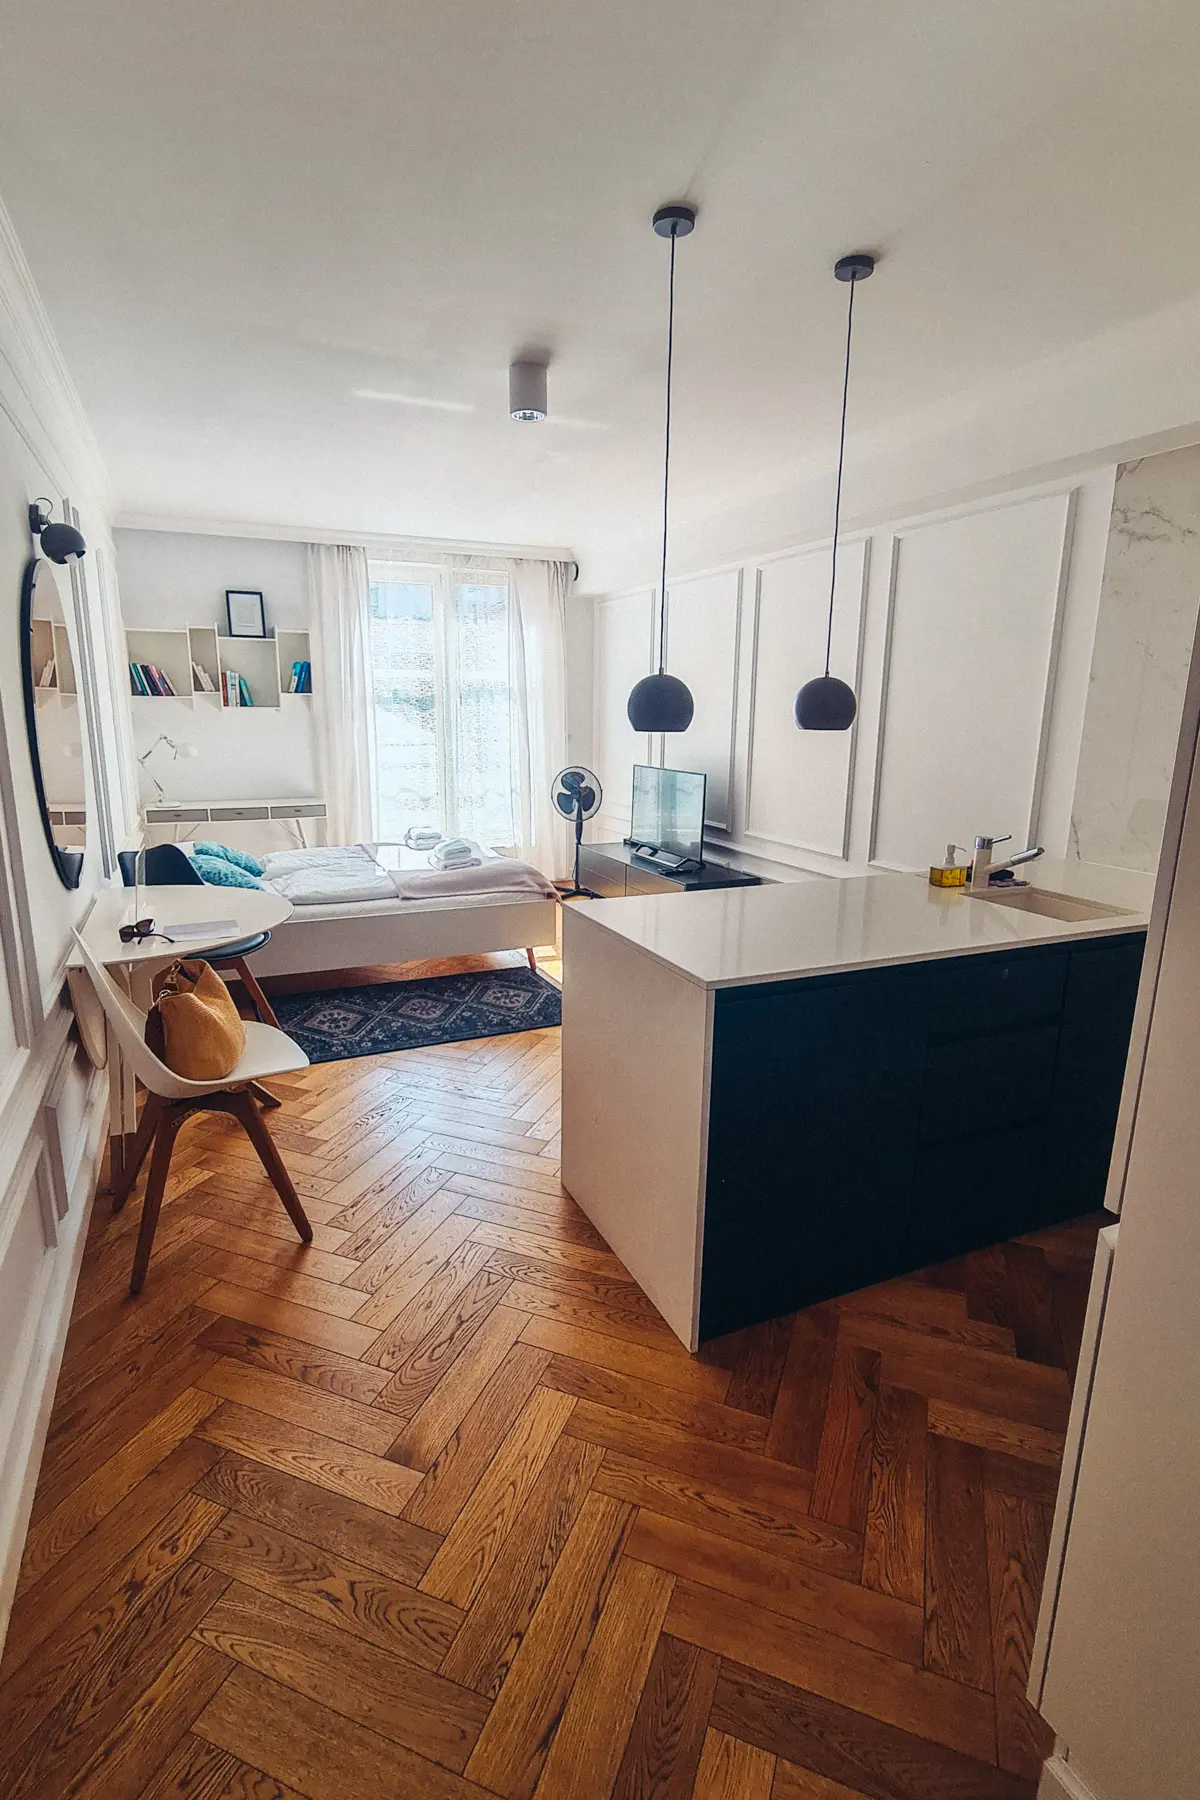 View from the entrance of a modern apartment in Kazimierz with herringbone floors, a black kitchen island and white paneled walls, one of the best places to stay in Krakow.